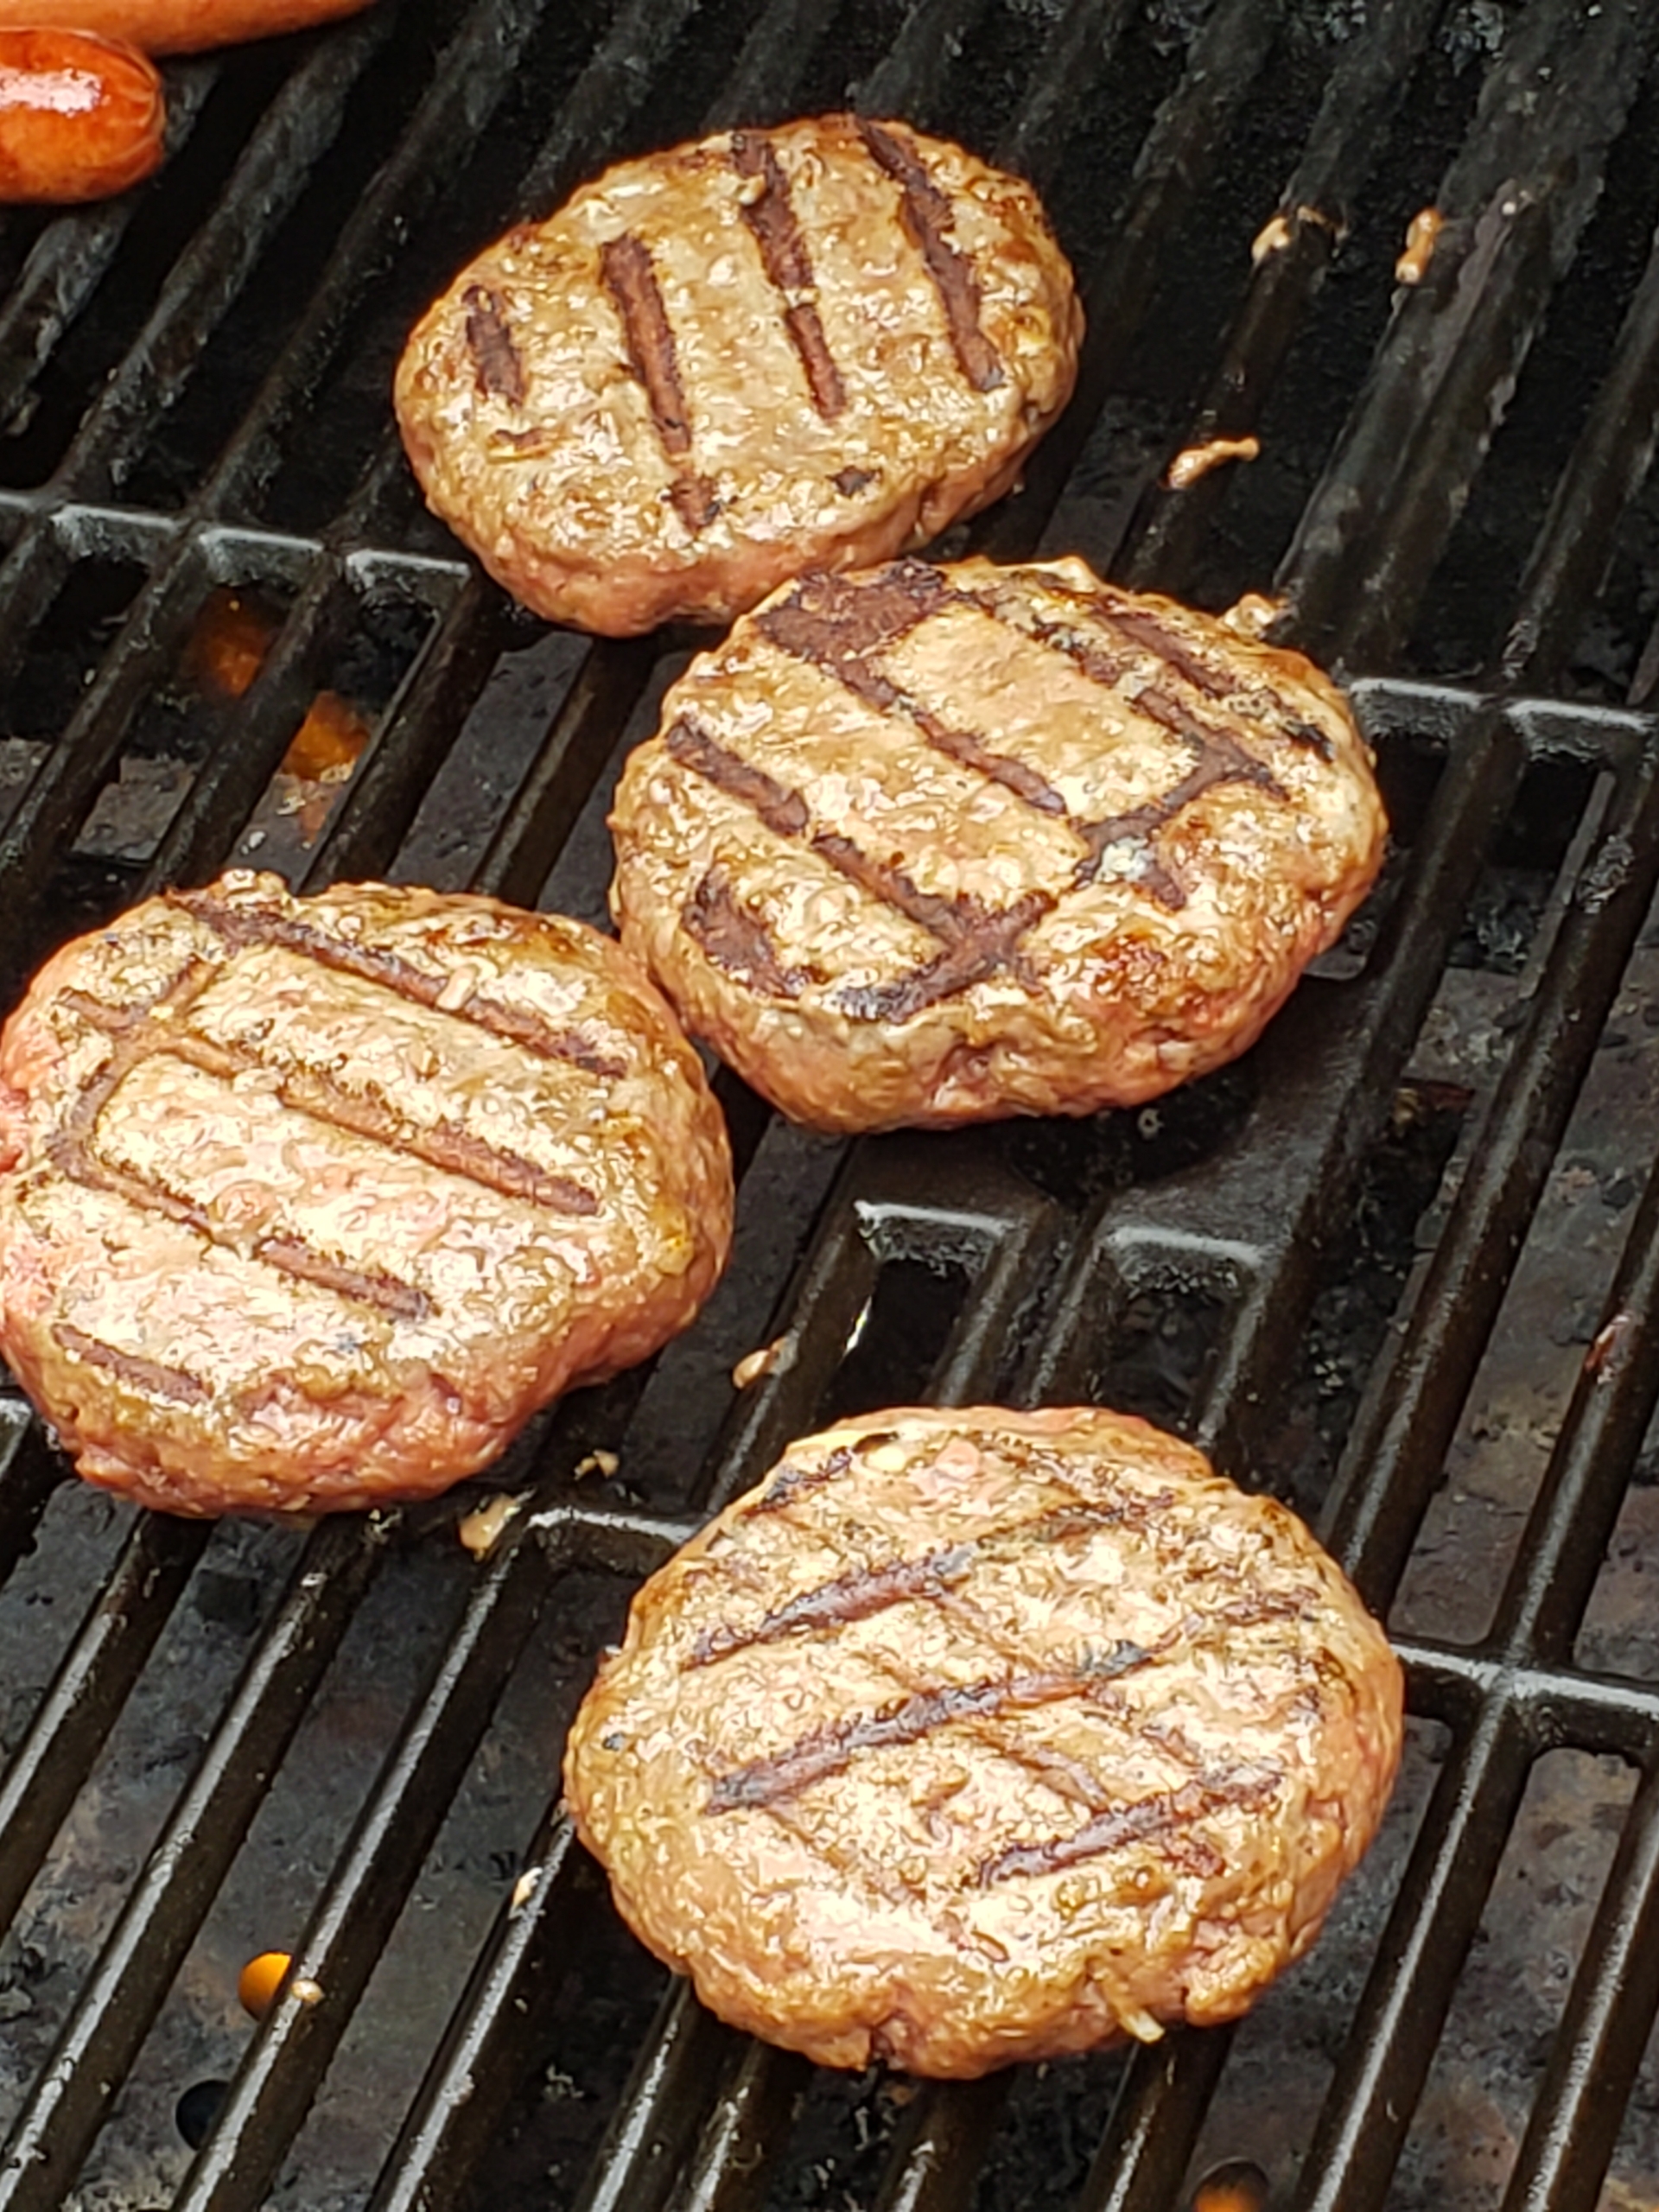 4 cooked hamburgers on the grill